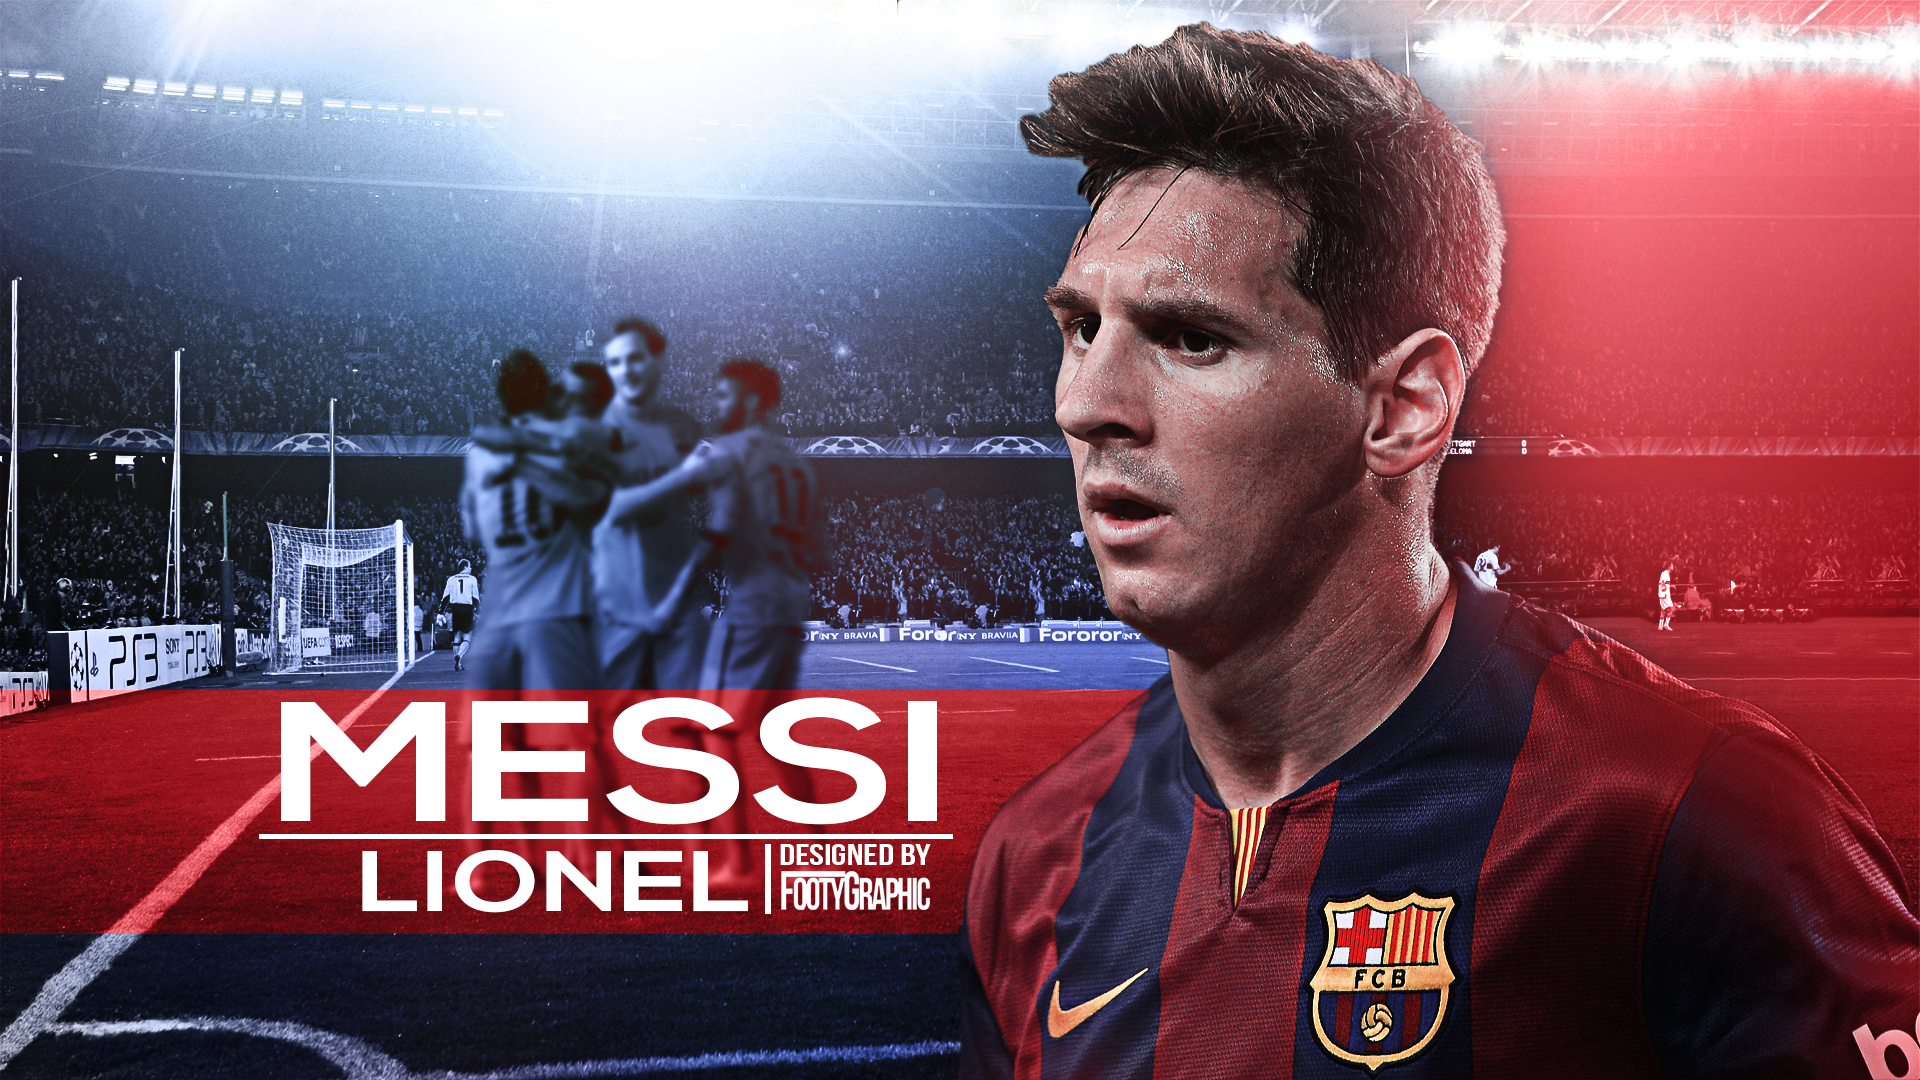 Lionel Messi 2015 Wallpapers High Quality On Hd Wallpaper - Messi Wallpaper Terbaru 2015 - HD Wallpaper 